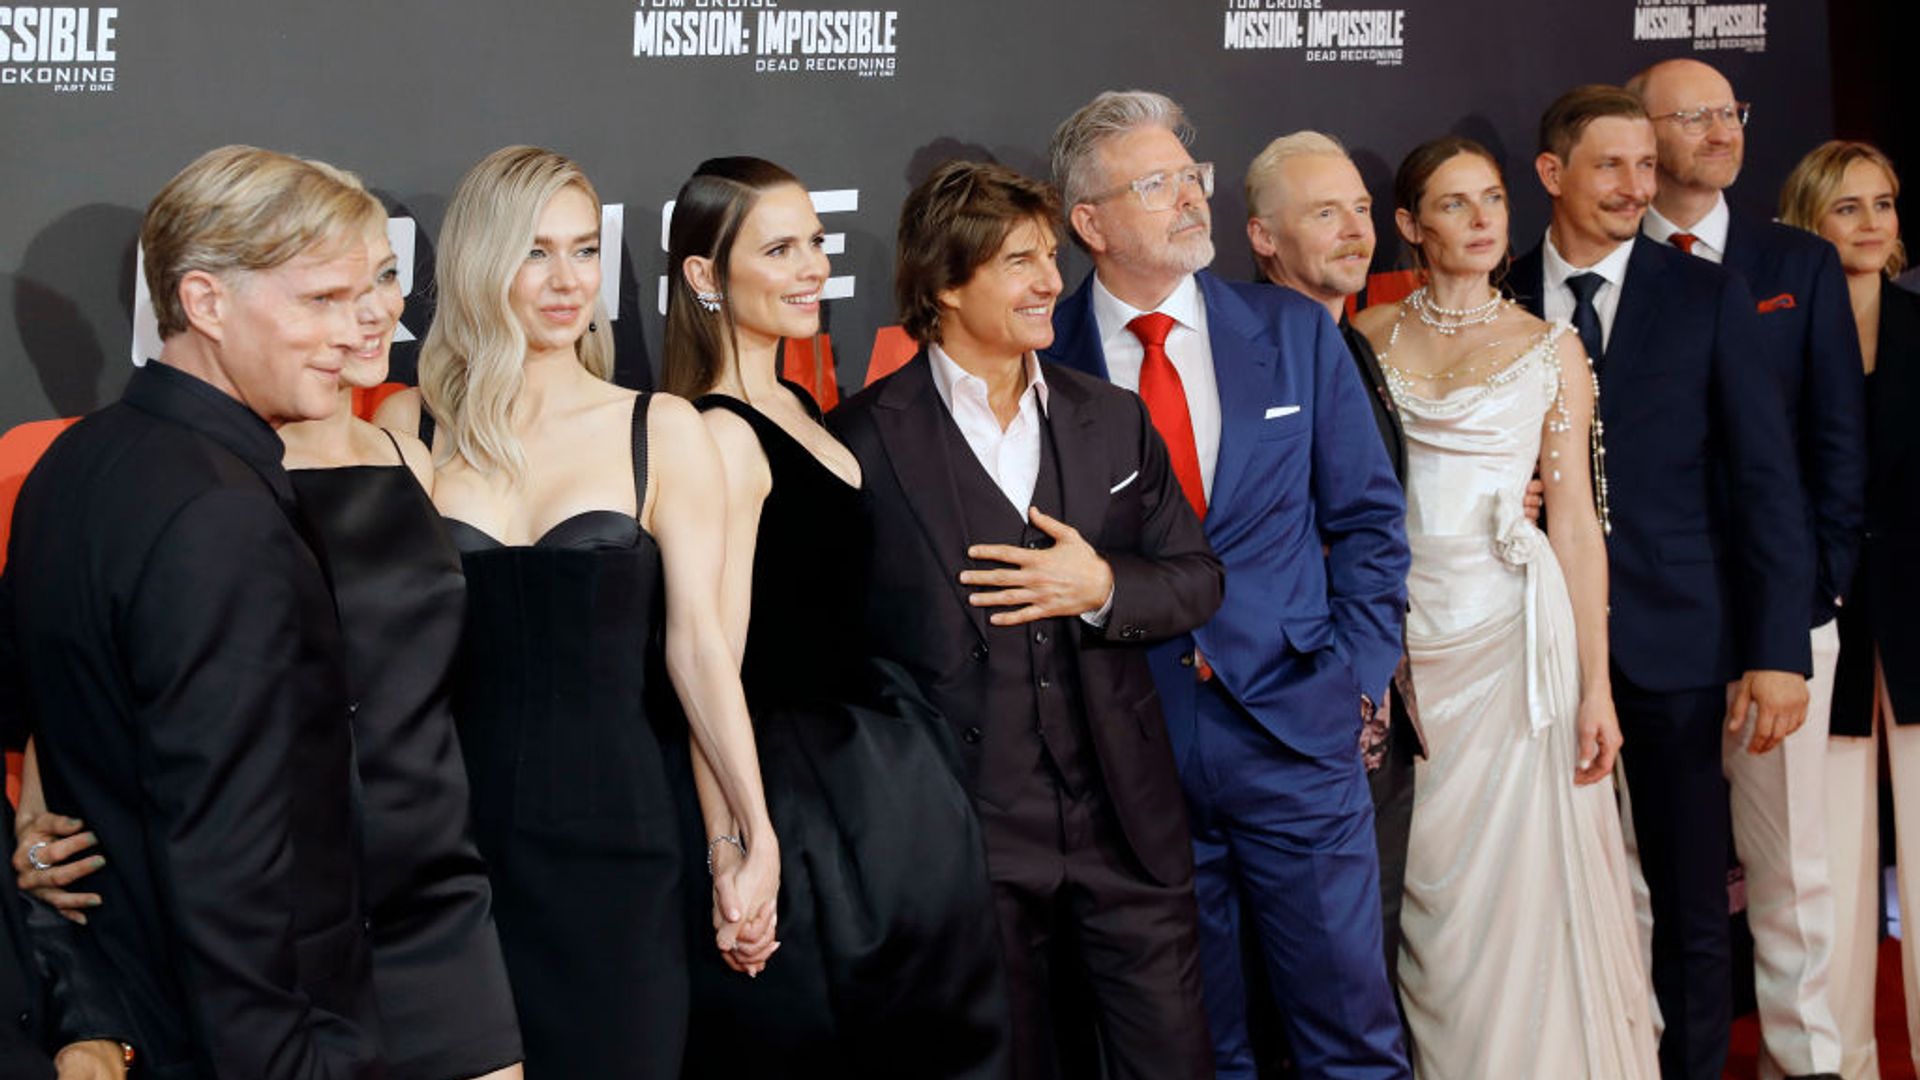 The complete cast of Mission Impossible 7 pose together on the red carpet. 